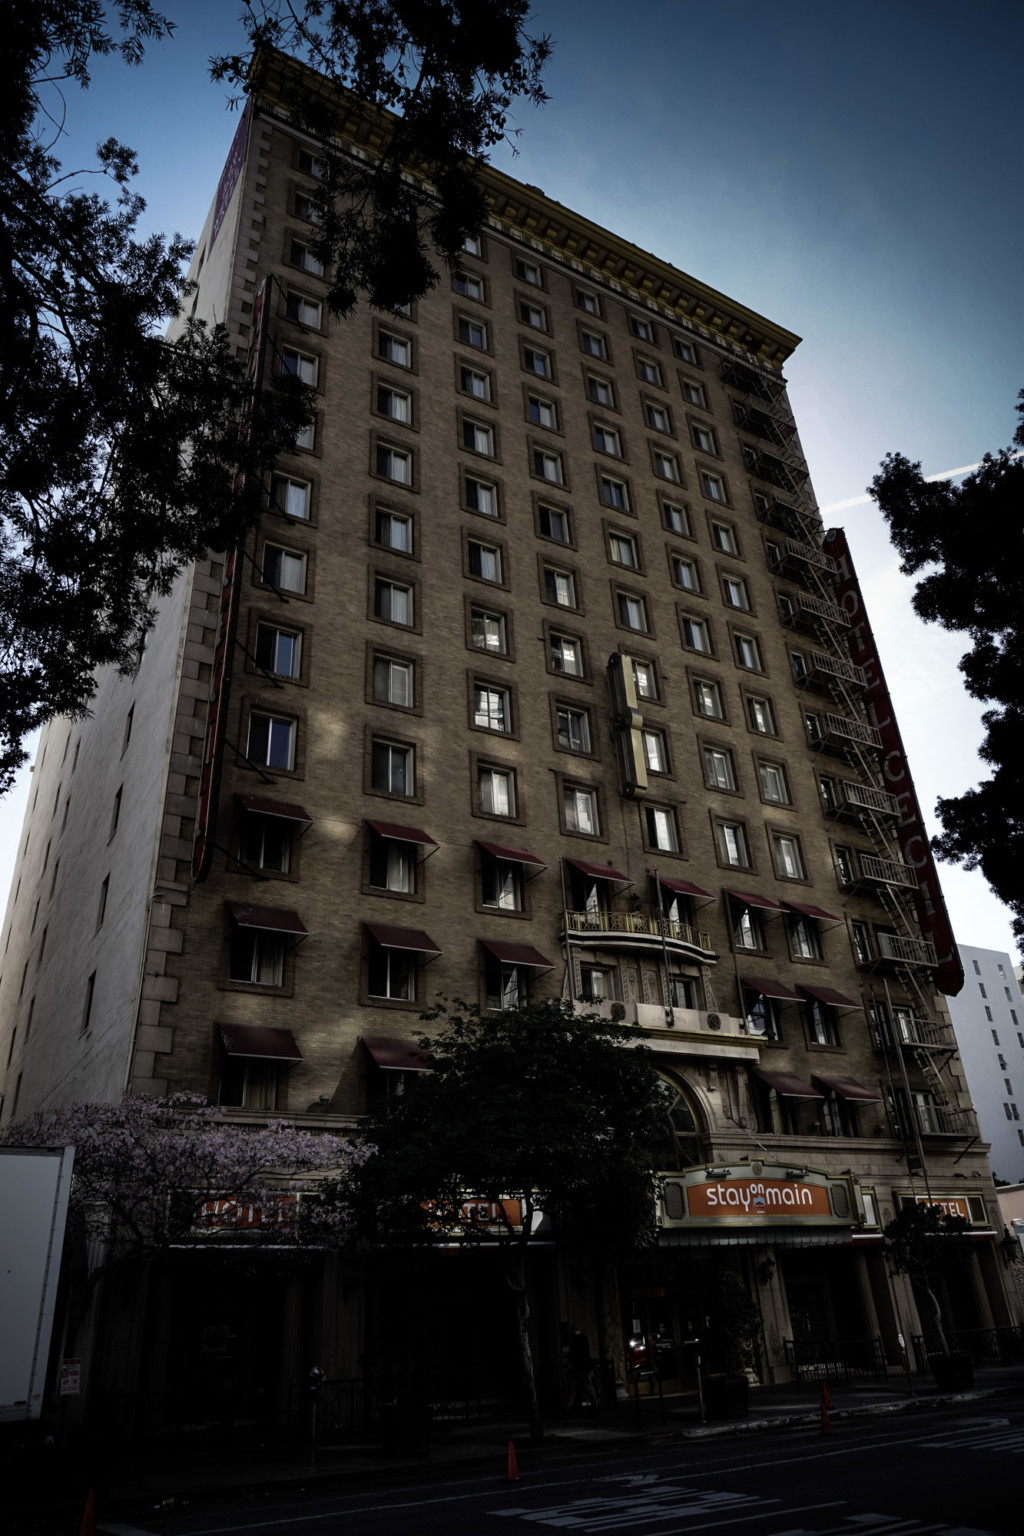 Cecil Hotel: Death, Serial Killers and Ghosts in Los Angeles - Amy's Crypt